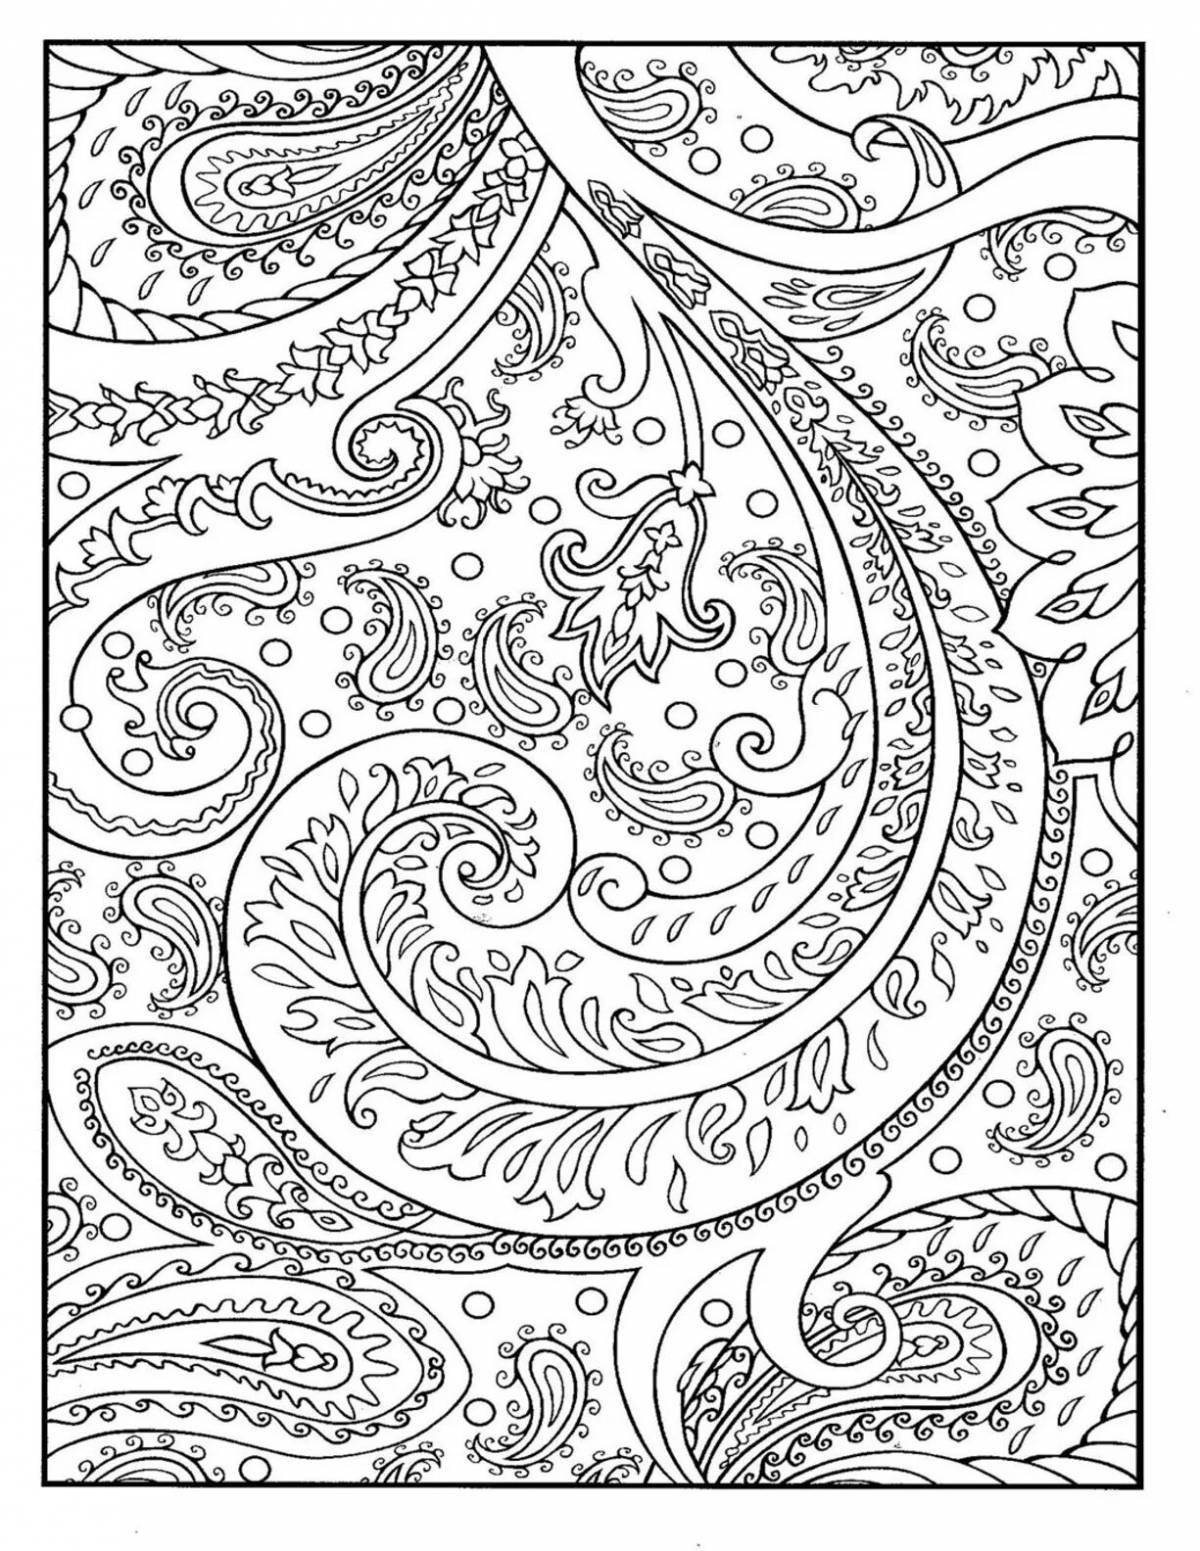 Anxiety-reducing coloring book for children